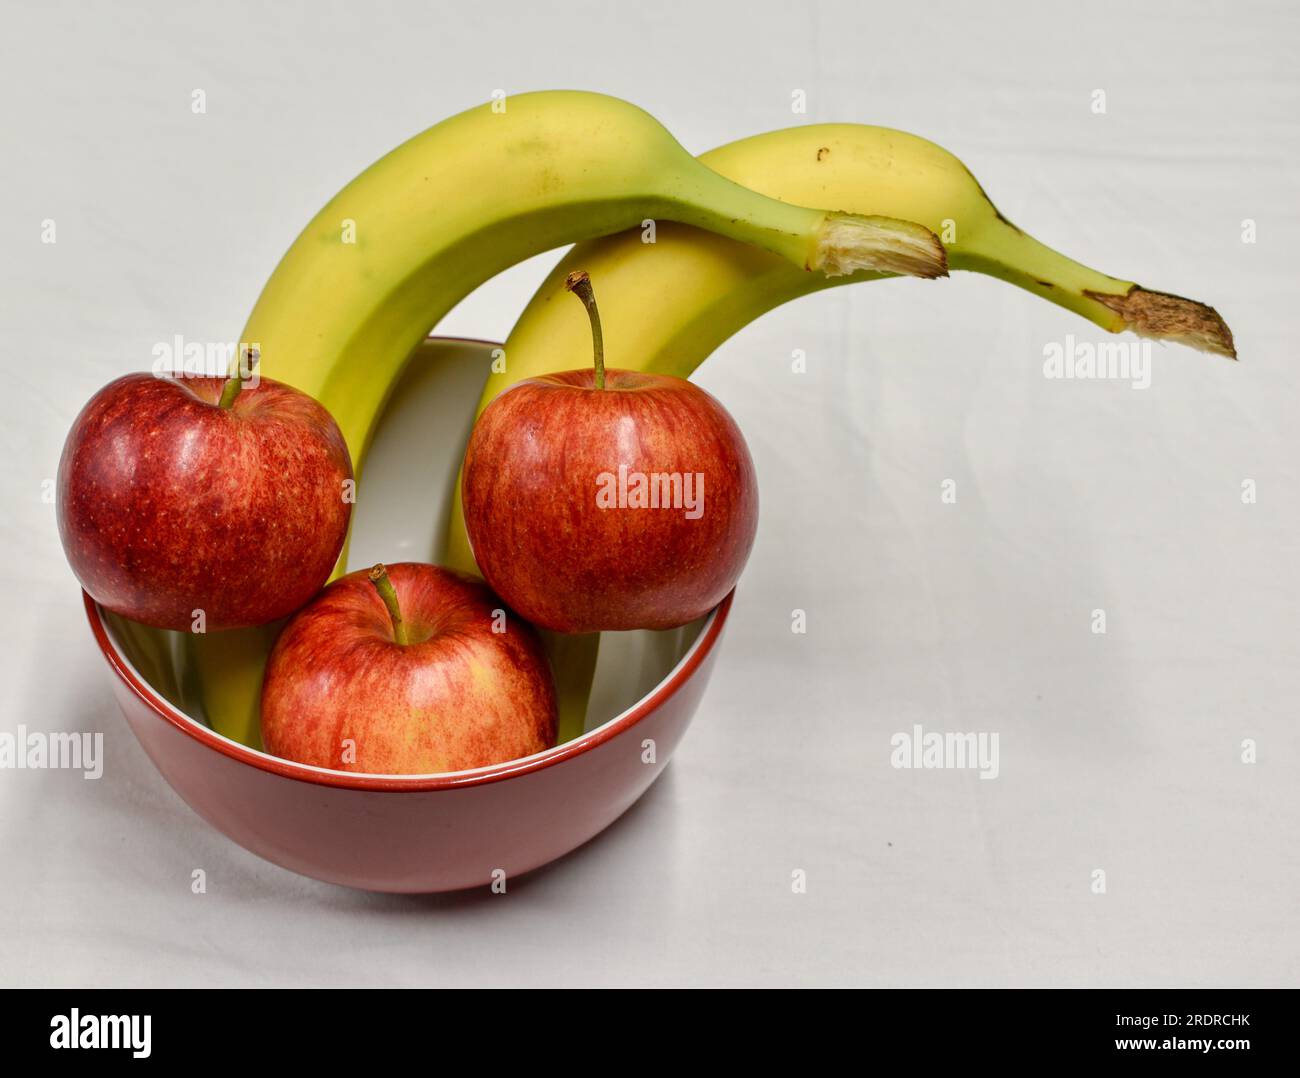 A red and white bowl containing three red apples and two bananas. Stock Photo